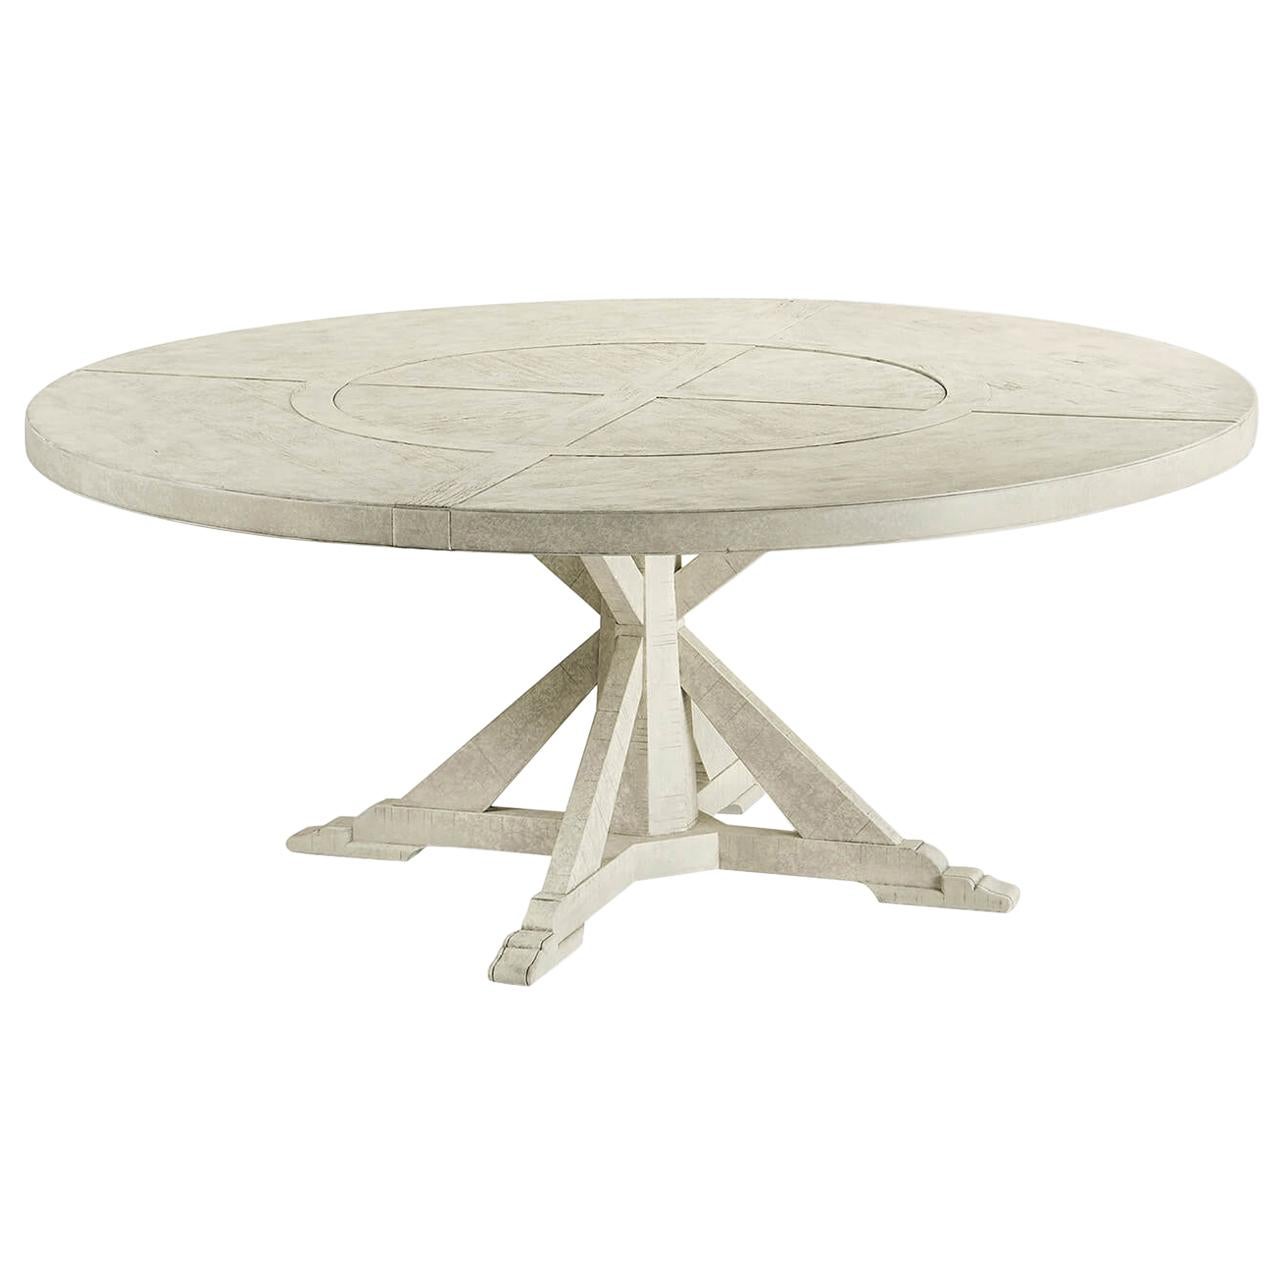 Rustic Round Dining Table, Whitewash